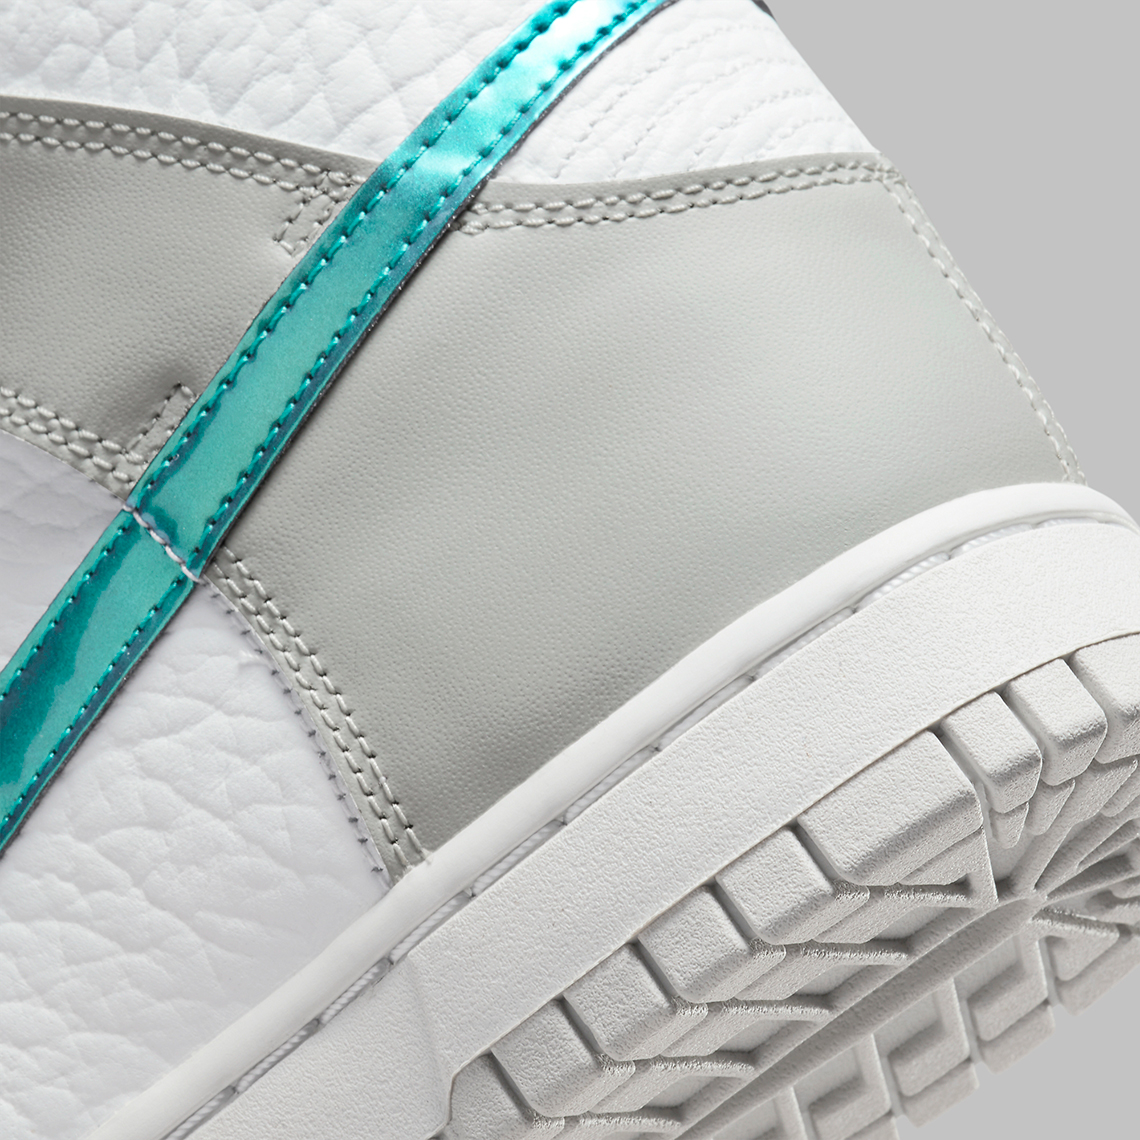 nike lunar 10 degree head for sale in california White Grey Turquoise Dr7855 100 4